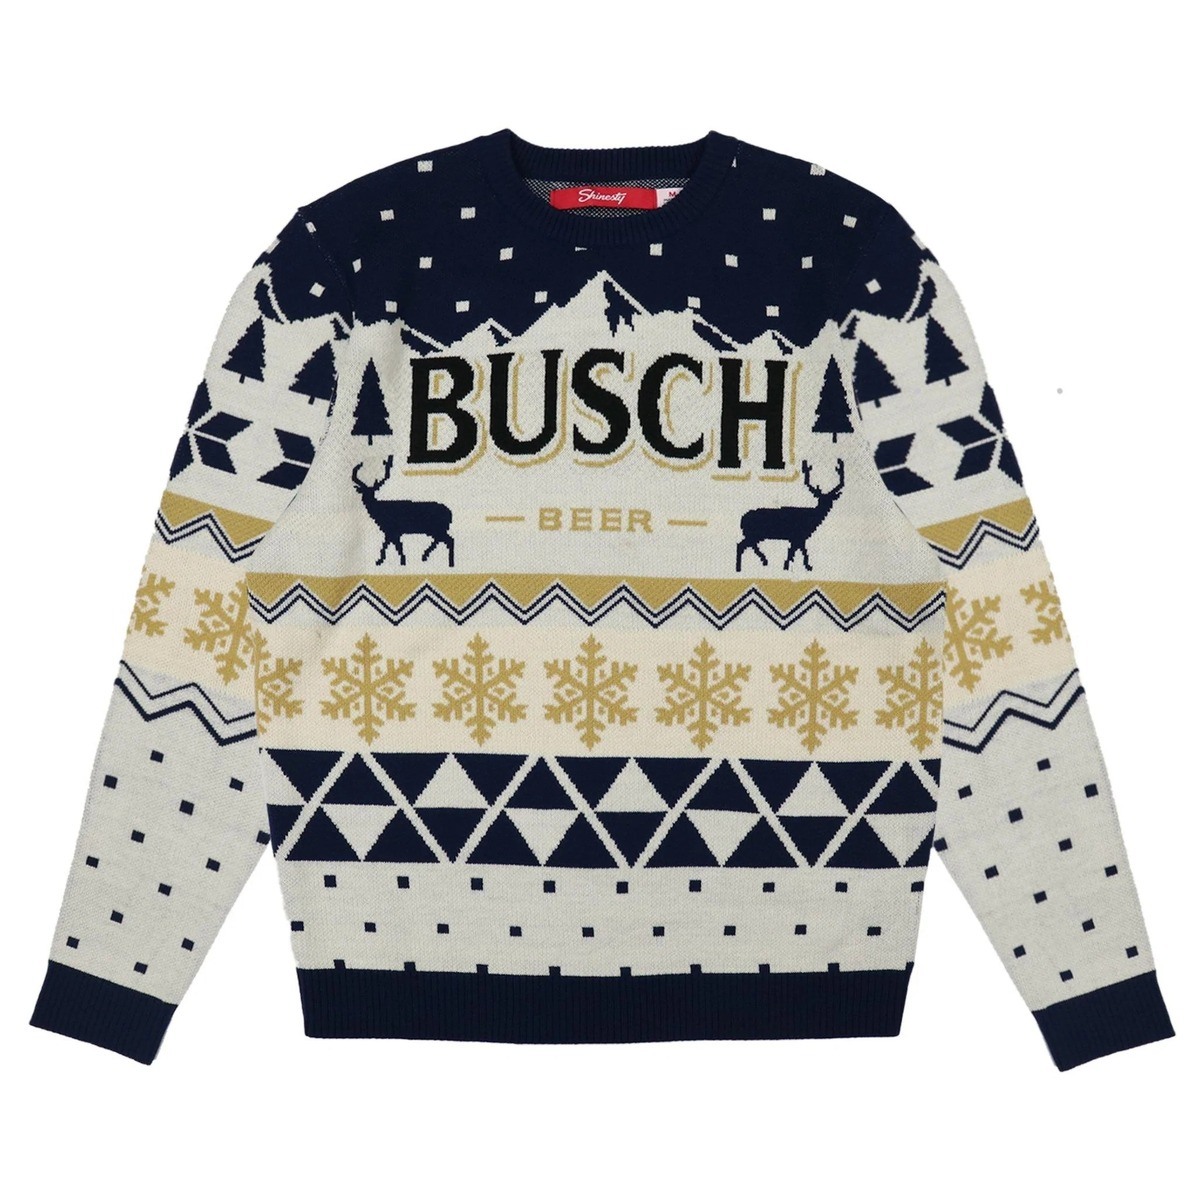 Vintage Busch Beer Ugly Christmas Sweater Xmas Gift For Best Friends